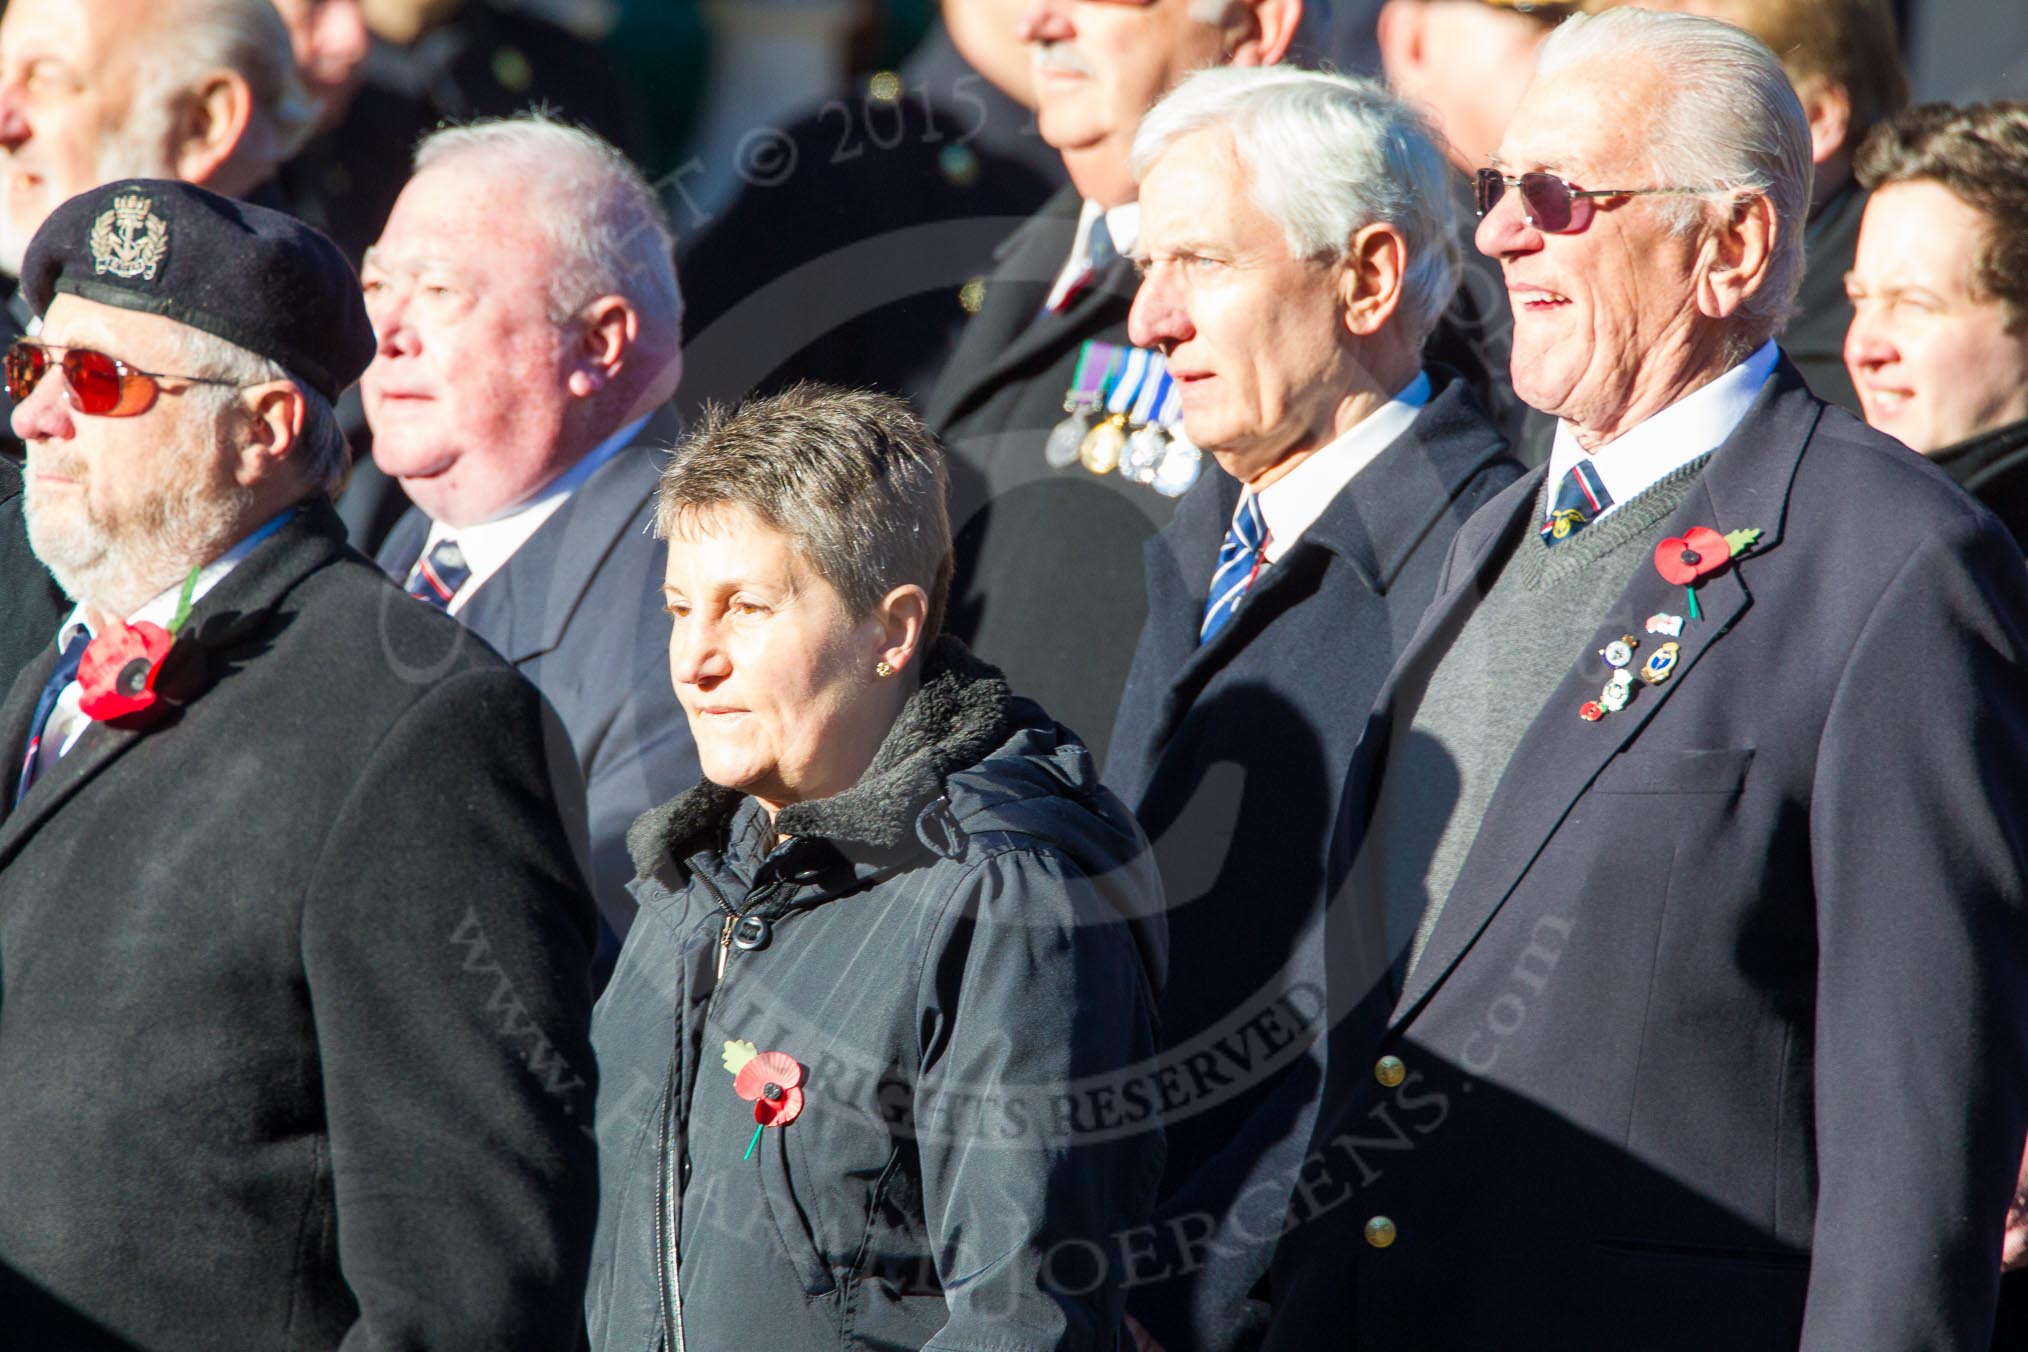 Remembrance Sunday Cenotaph March Past 2013: E2 - Royal Naval Association..
Press stand opposite the Foreign Office building, Whitehall, London SW1,
London,
Greater London,
United Kingdom,
on 10 November 2013 at 11:44, image #362